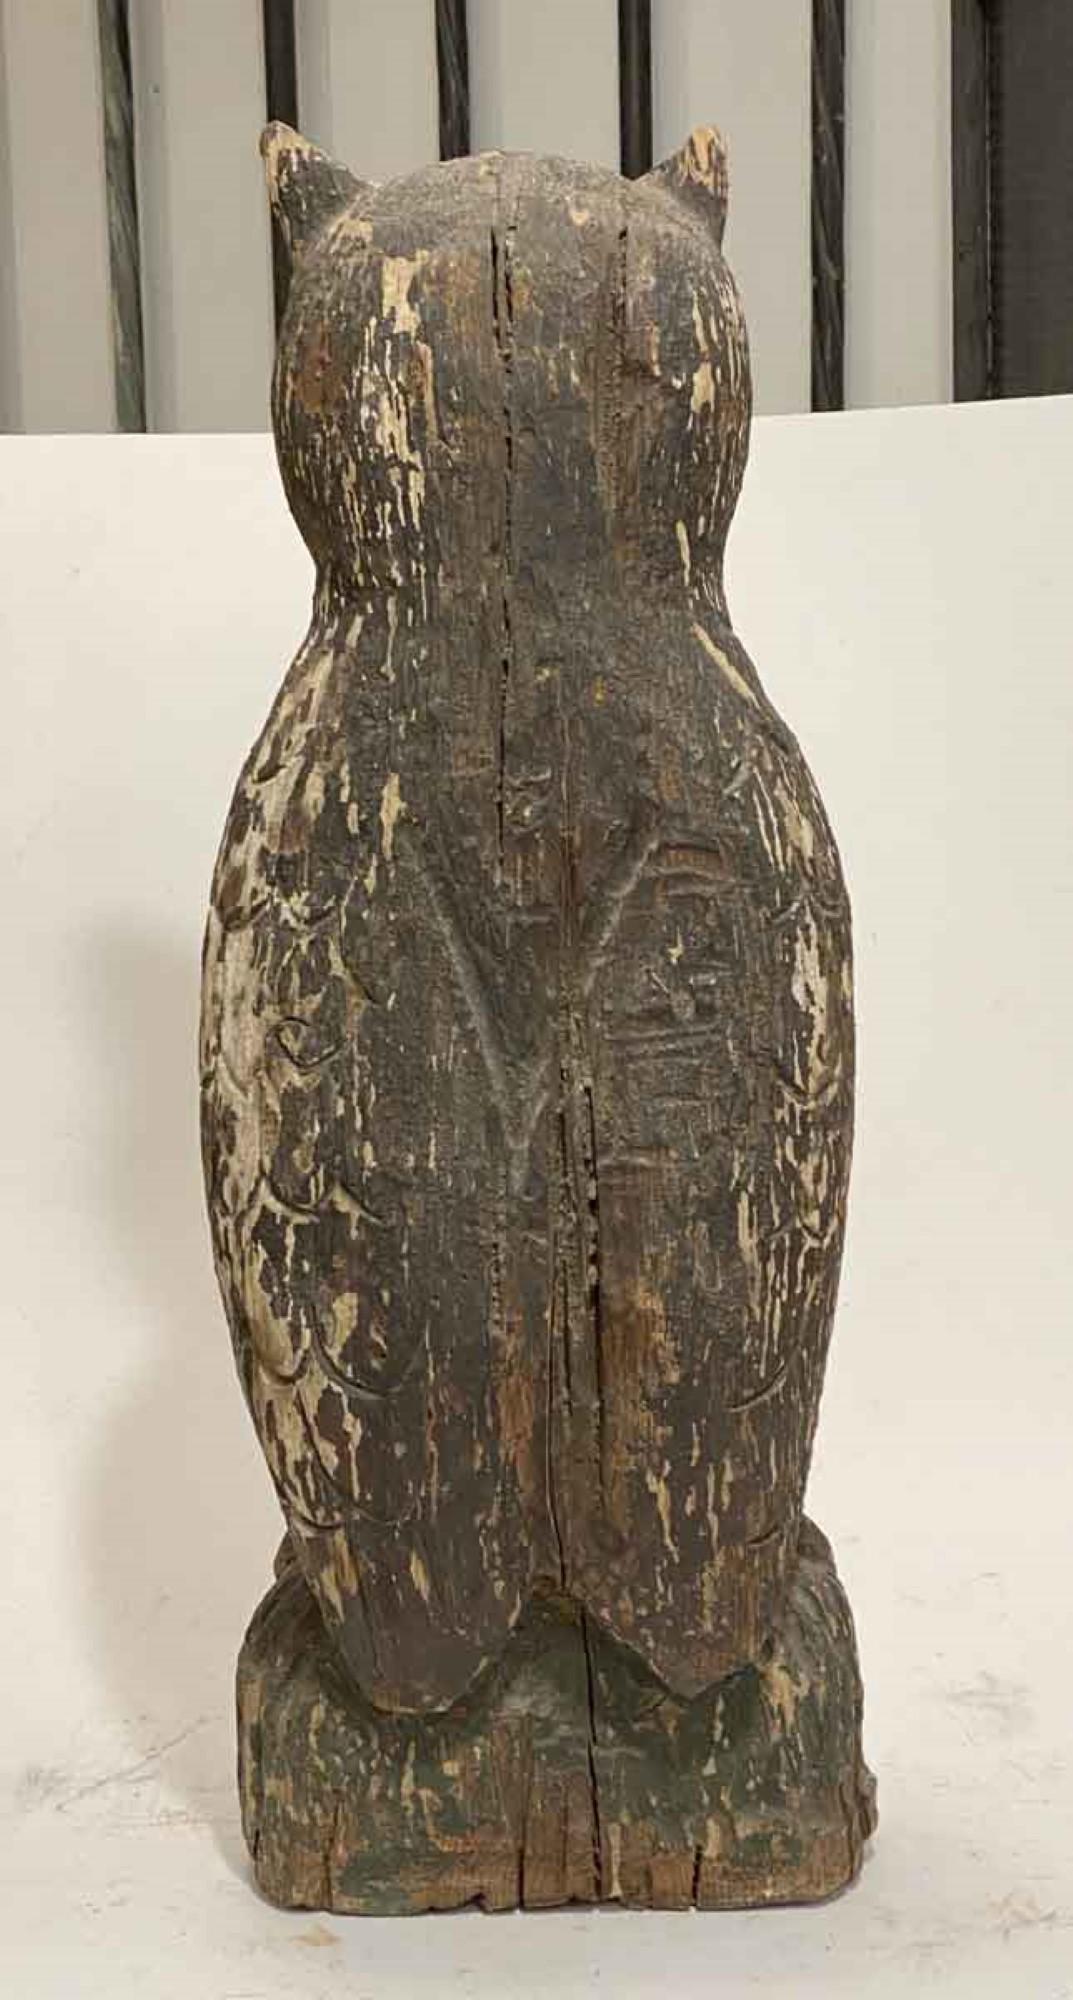 1940s Primitive Hand Carved Wood Owl Statue with Original Weathered Patina 2